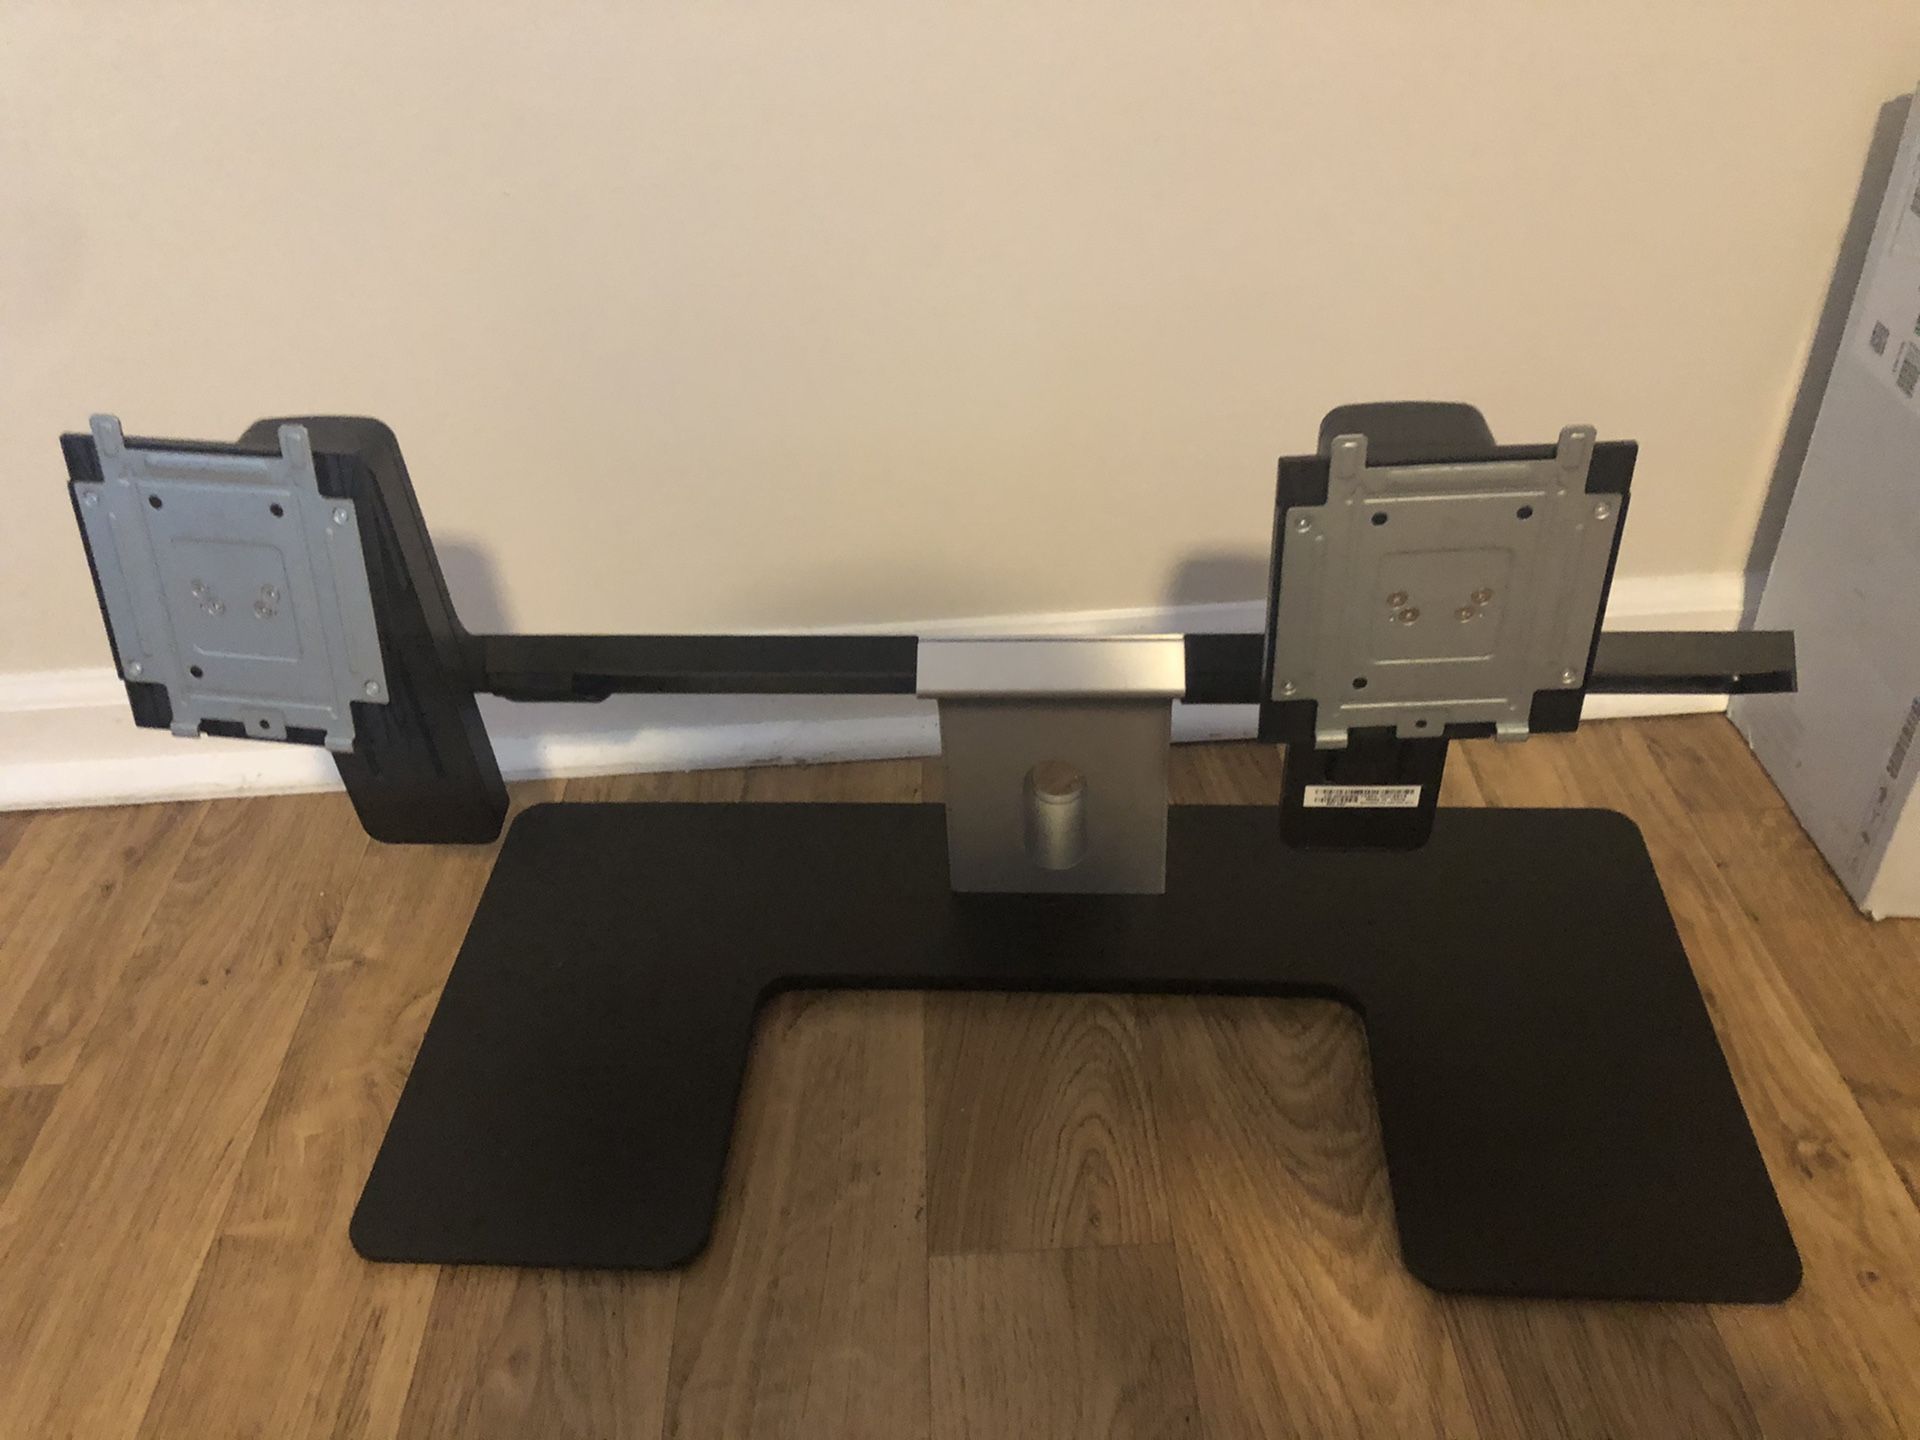 Dell Mds14 dual monitor stand.